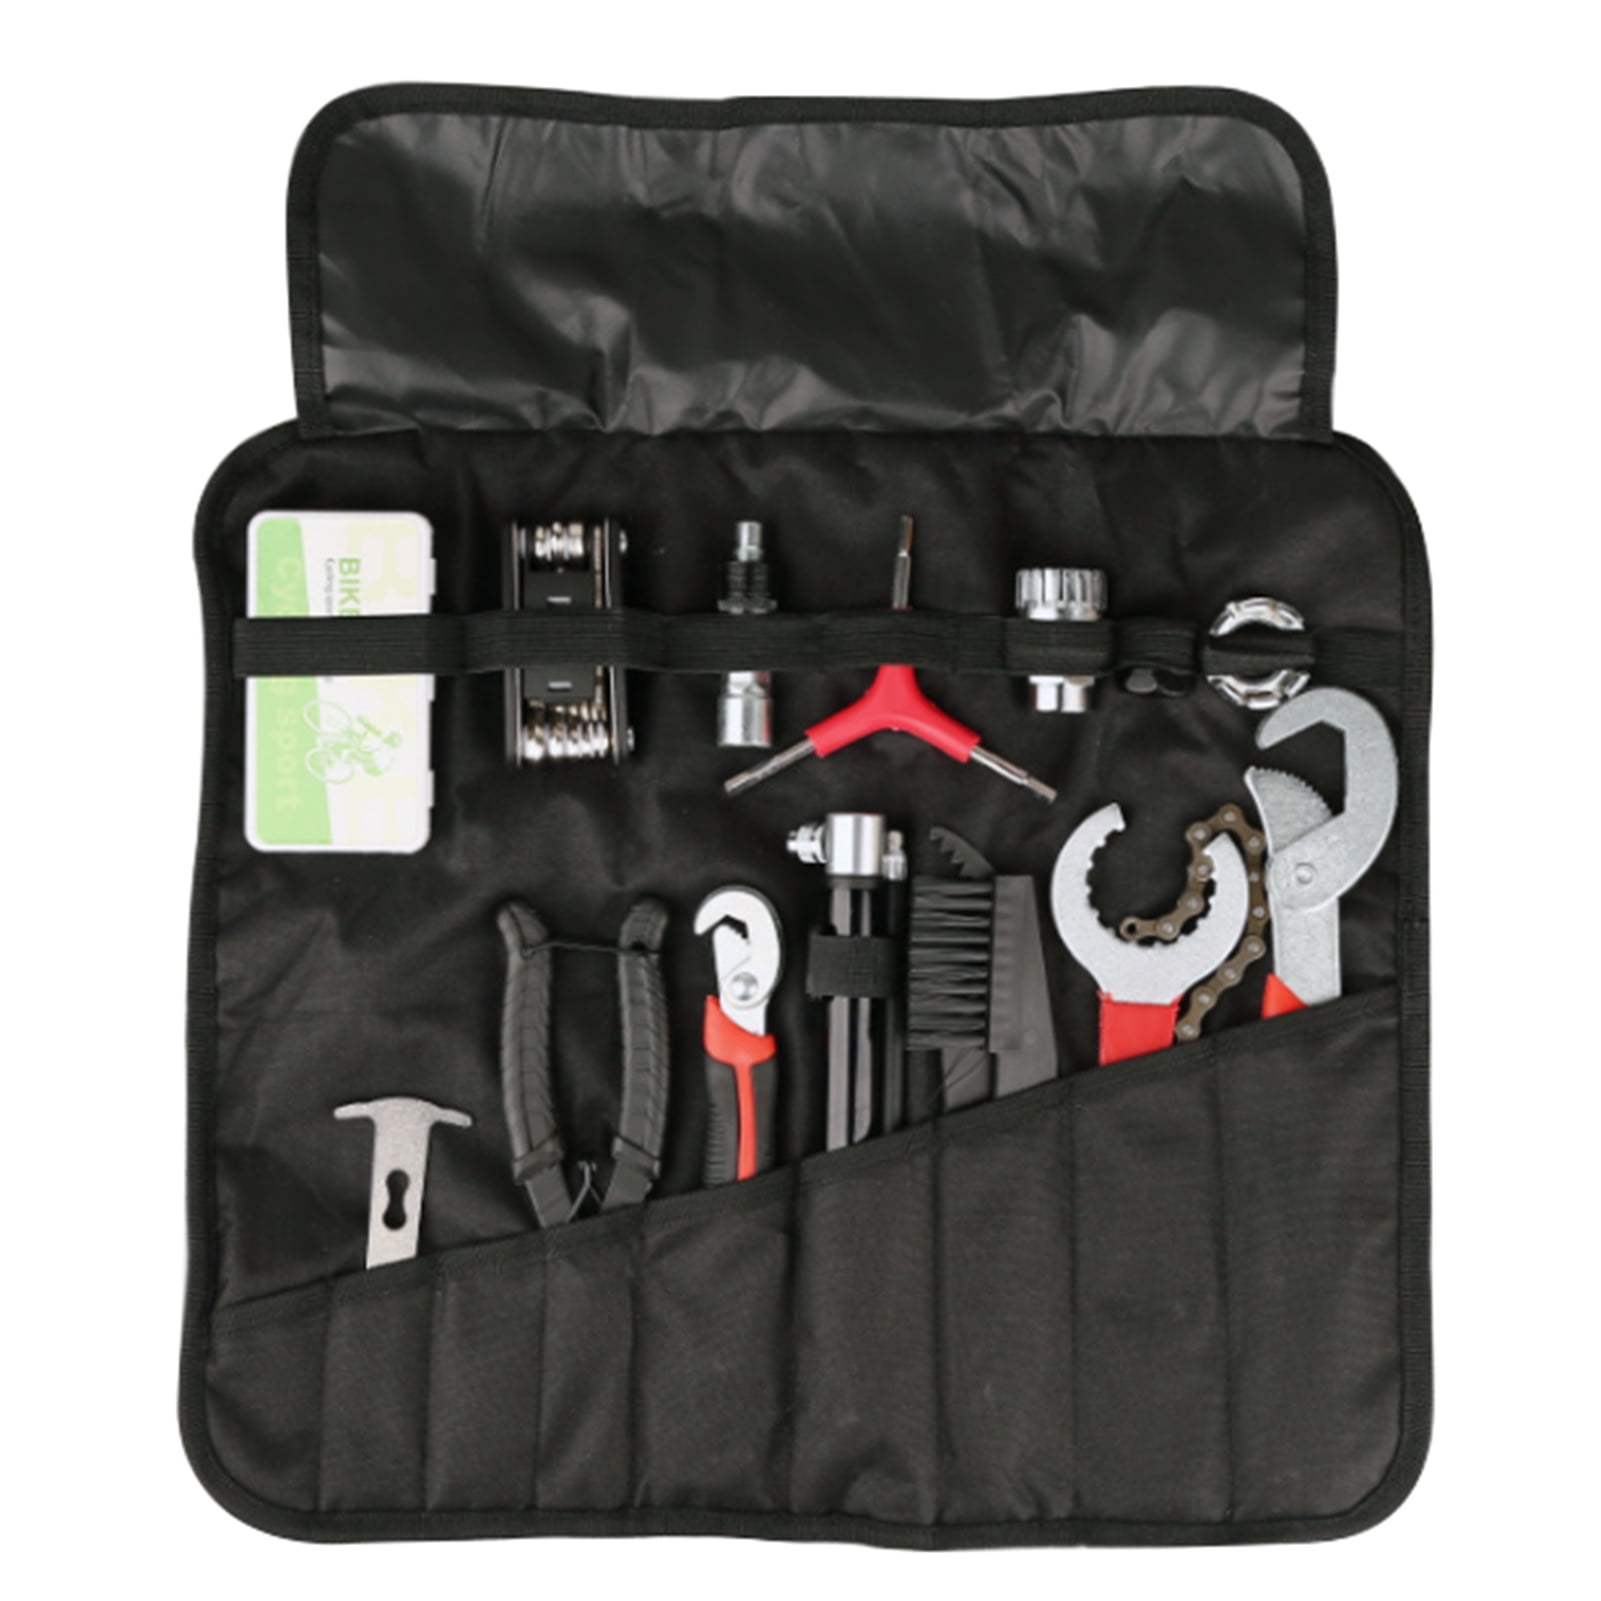 THYWD Bike Tool Kit 16 in 1 Bicycle Tire Patch Repair Kit Mountain Dirt Road Bike Tools Kit Set Folding Allen Wrench with Tire Levers Portable Multitool Maintenance Bag 